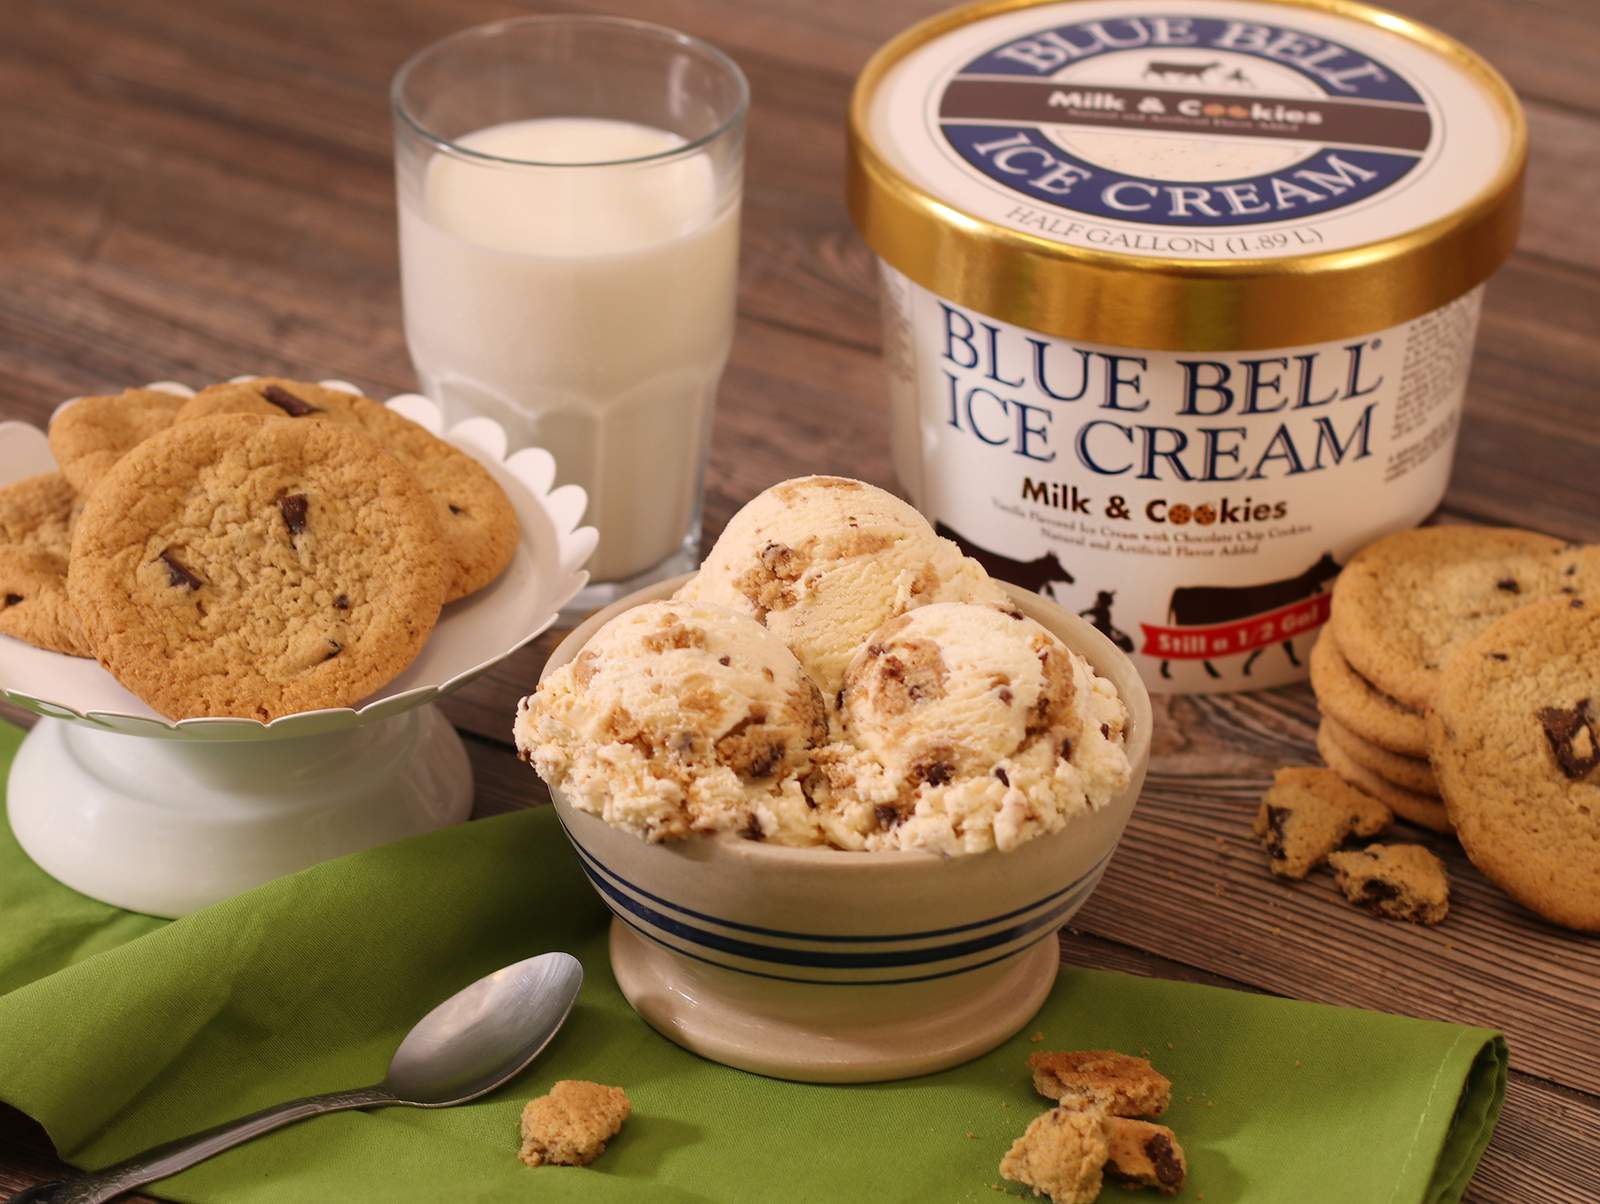 Blue Bell brings back Milk & Cookies flavor for National Ice Cream Month